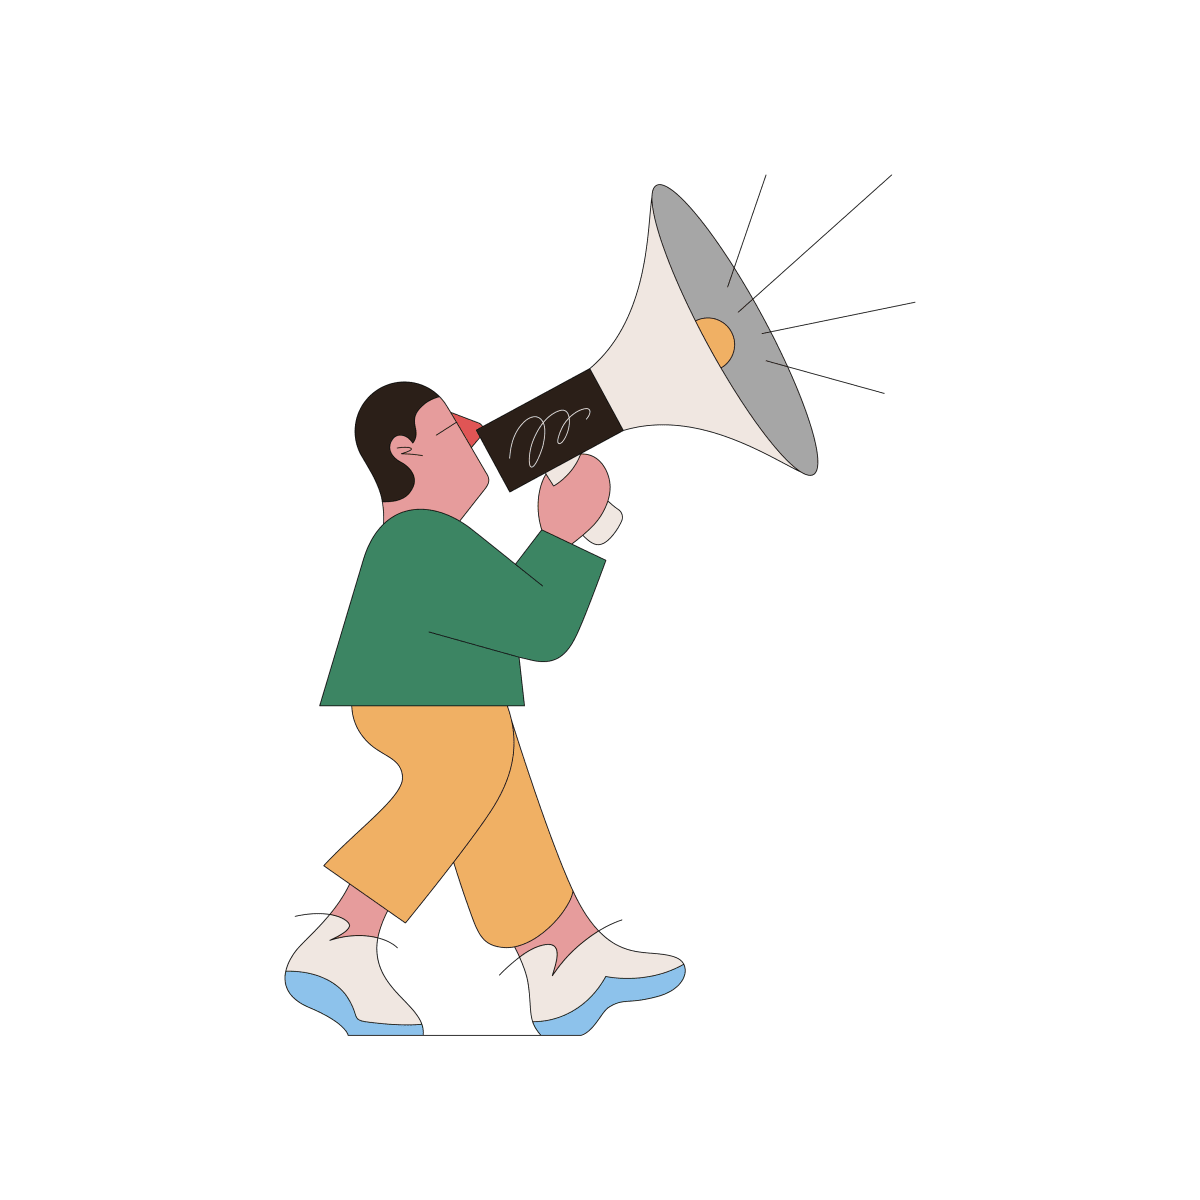 A stylised illustration of a person walking, speaking through an oversized megaphone.